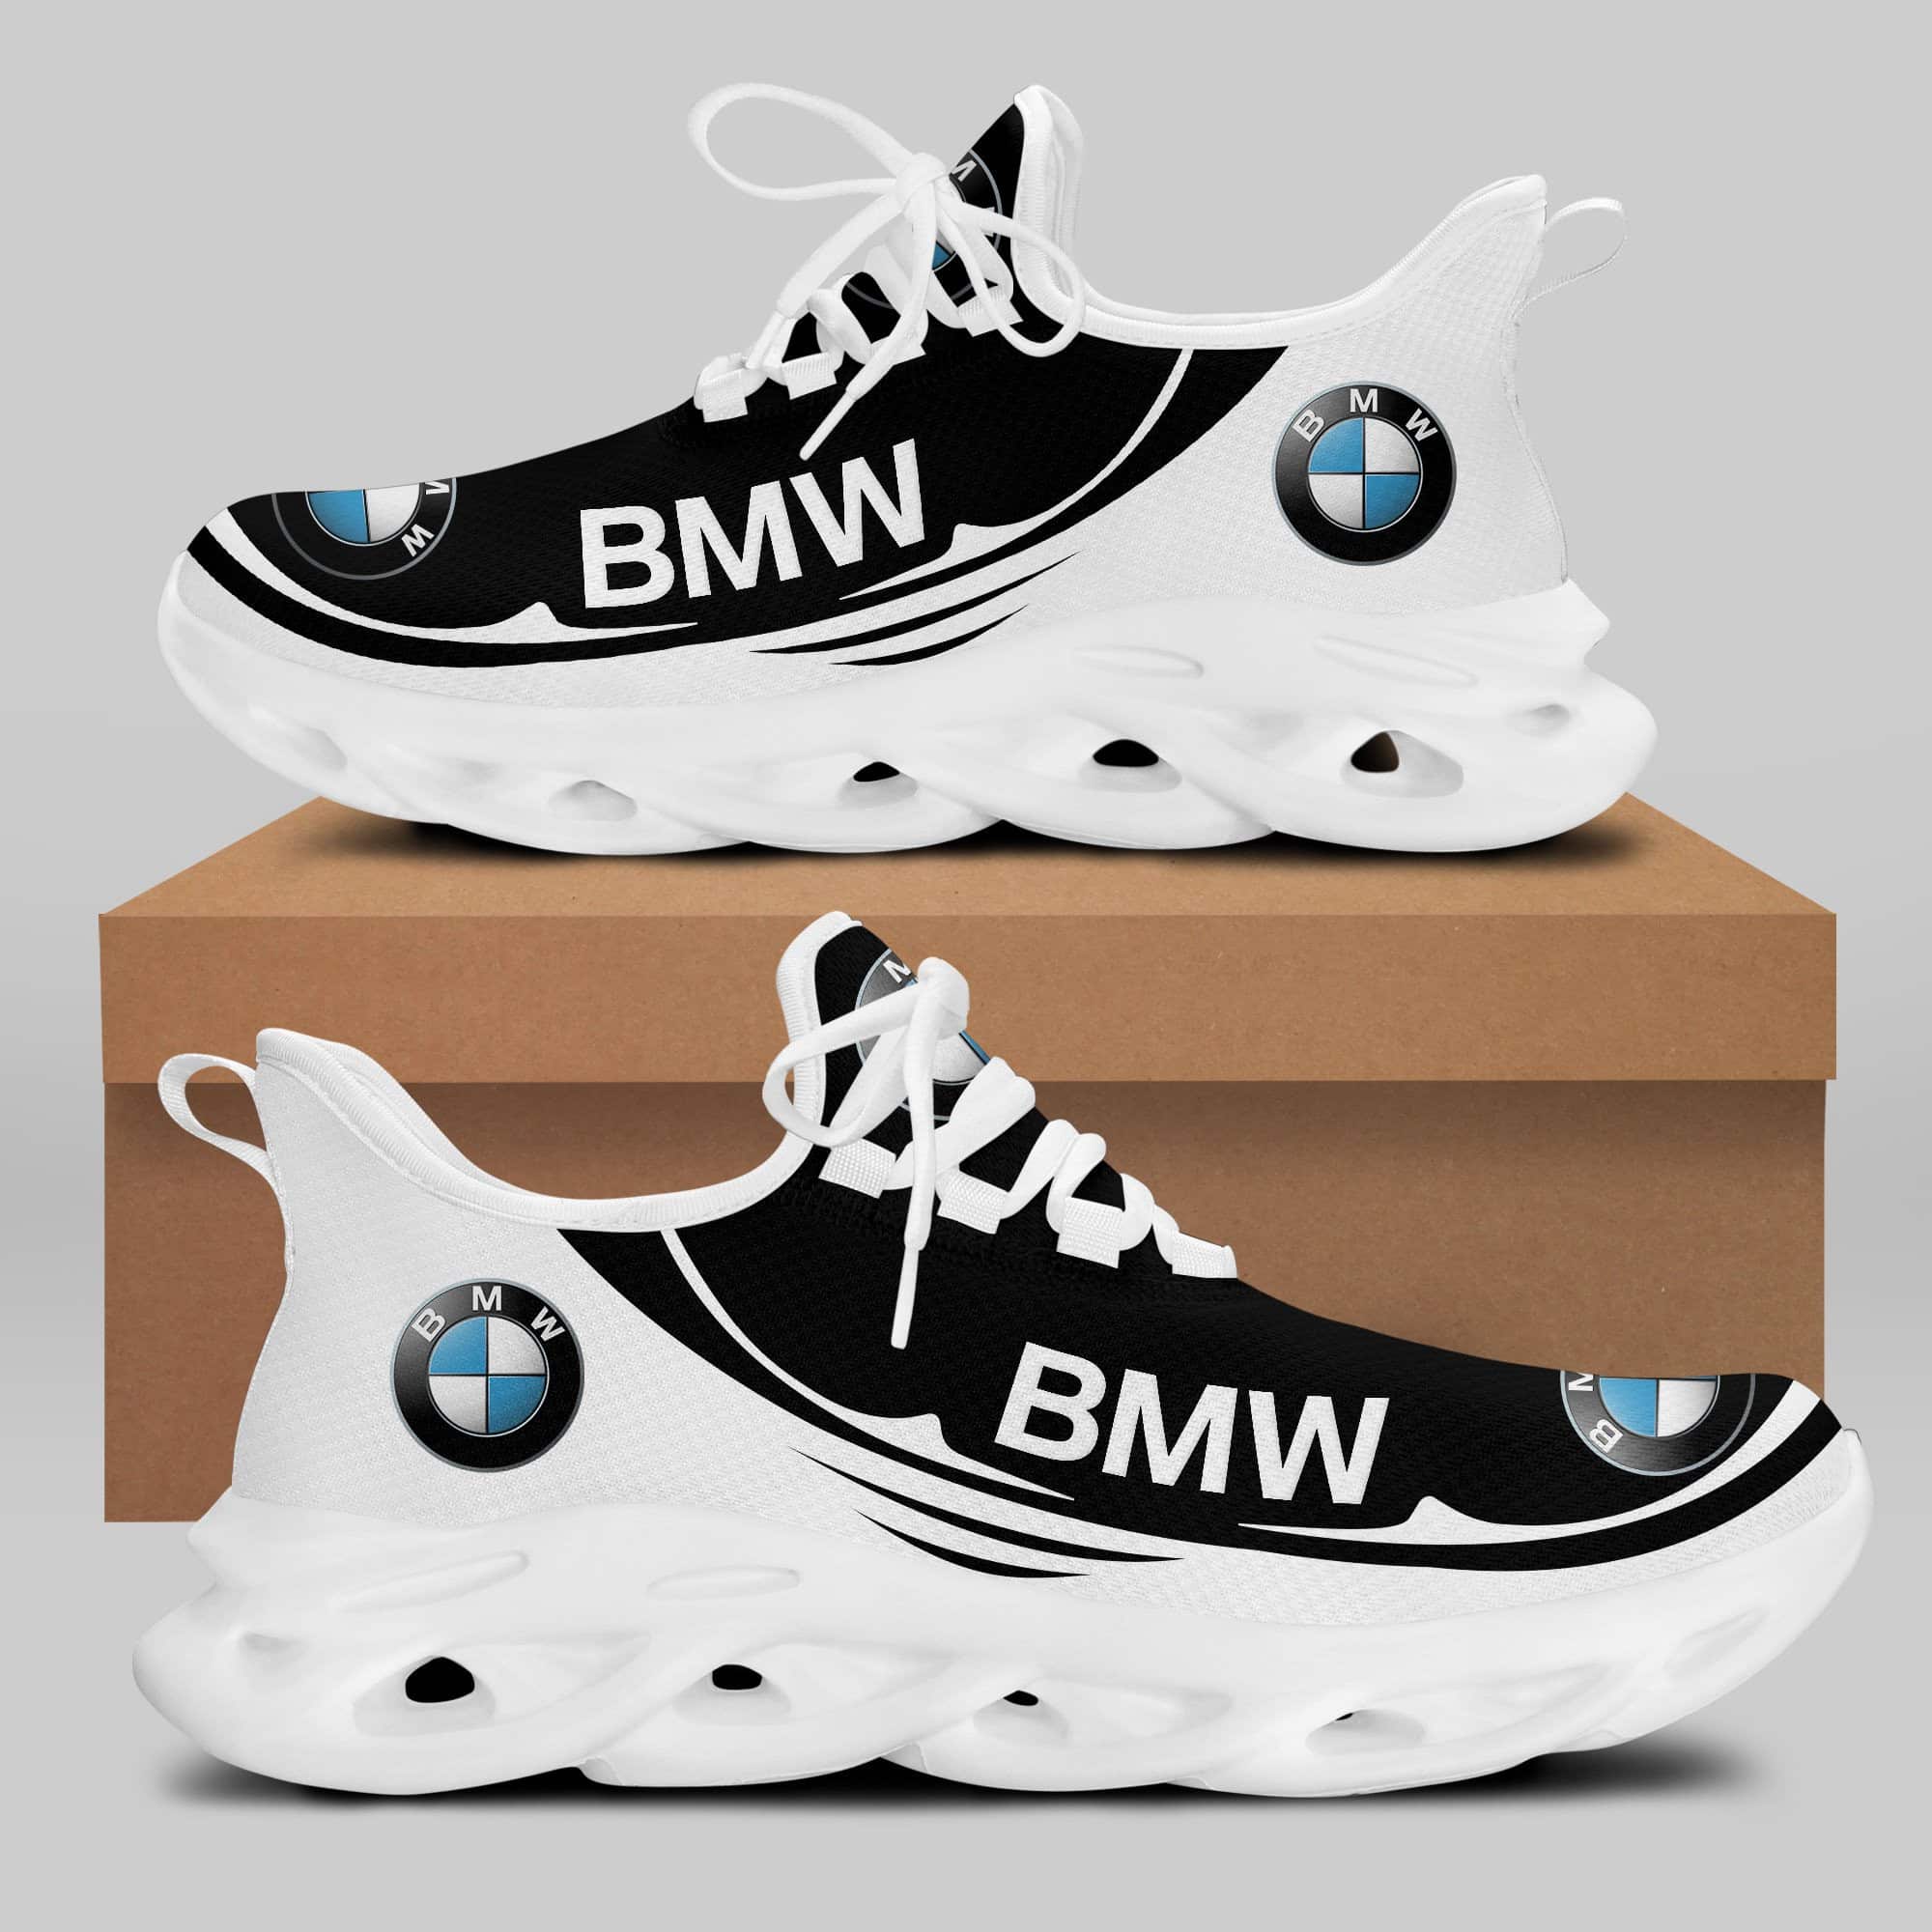 Bmw Running Shoes Max Soul Shoes Sneakers Ver 29 1